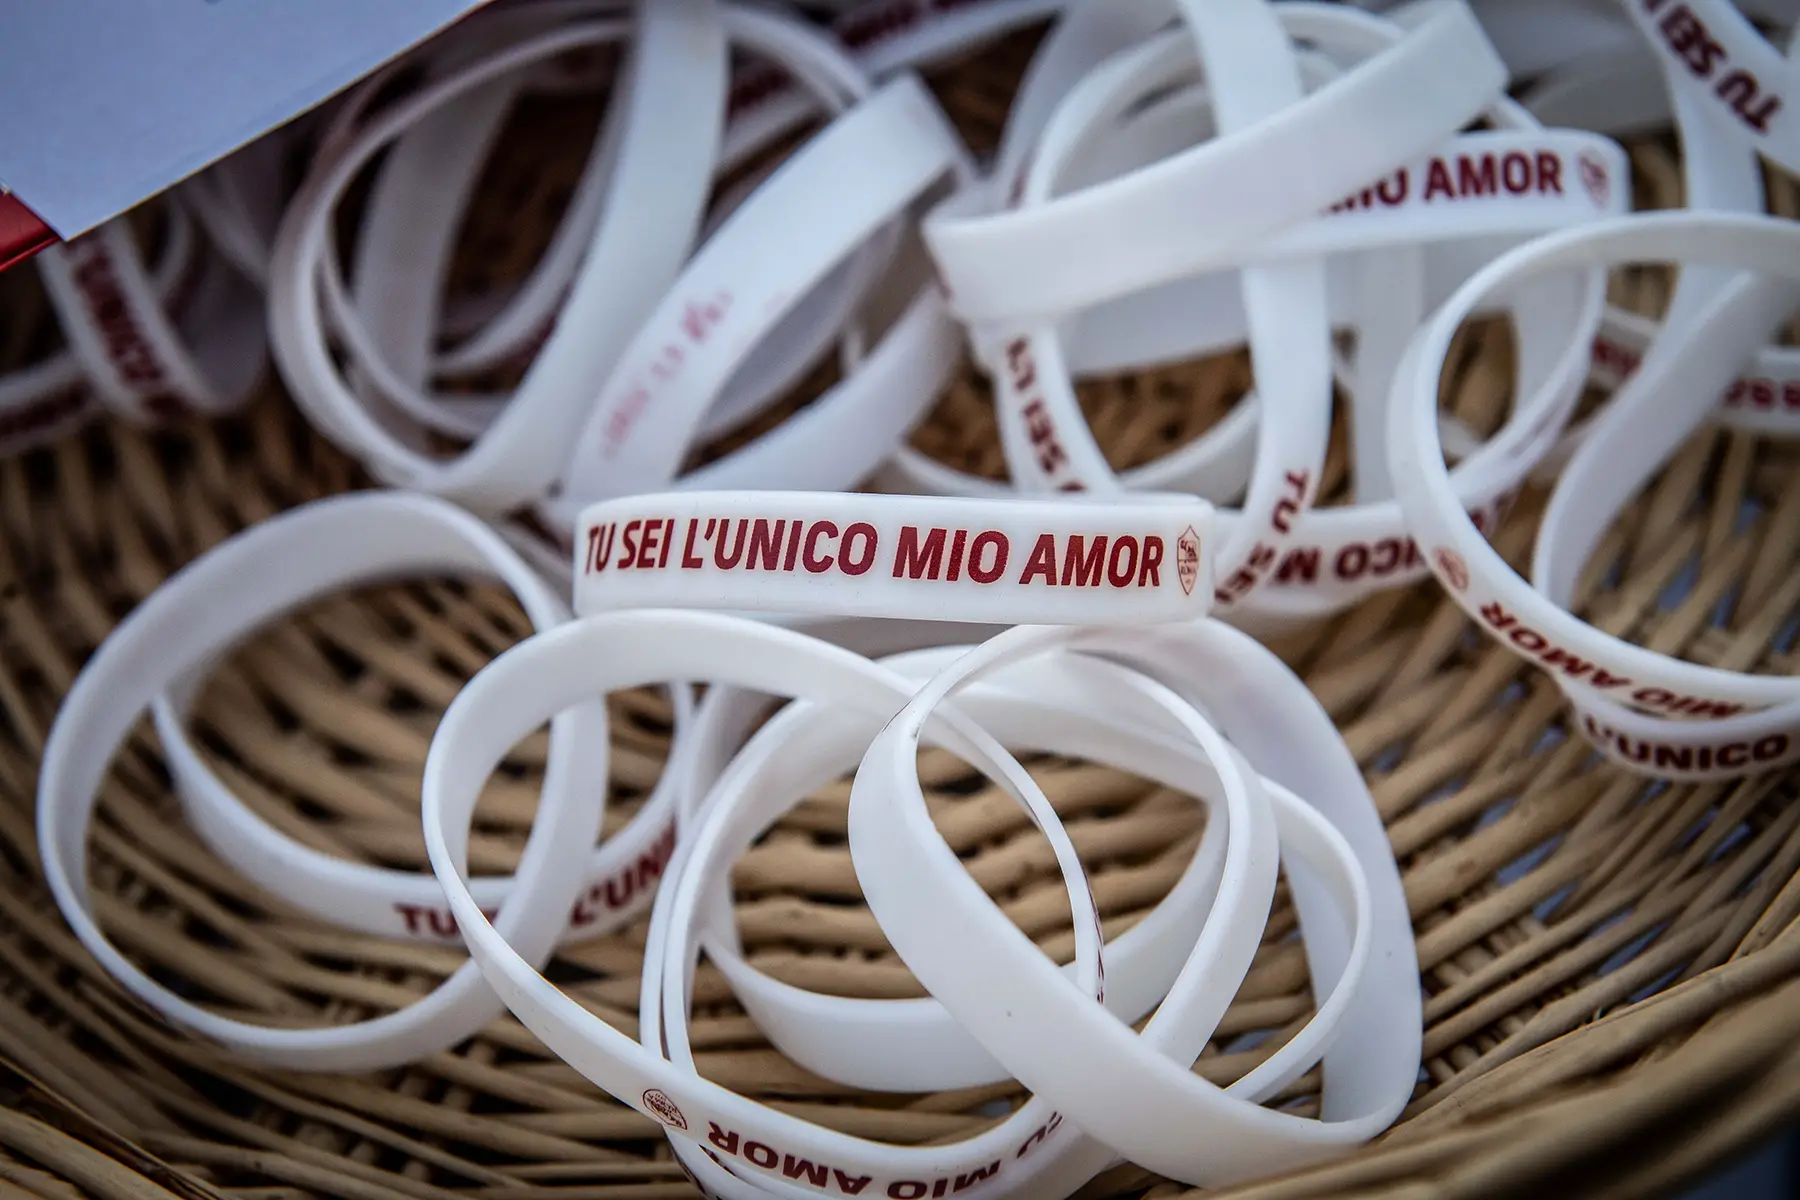 Wristbands in a basket with the text 'tu sei l'unico mio amor'